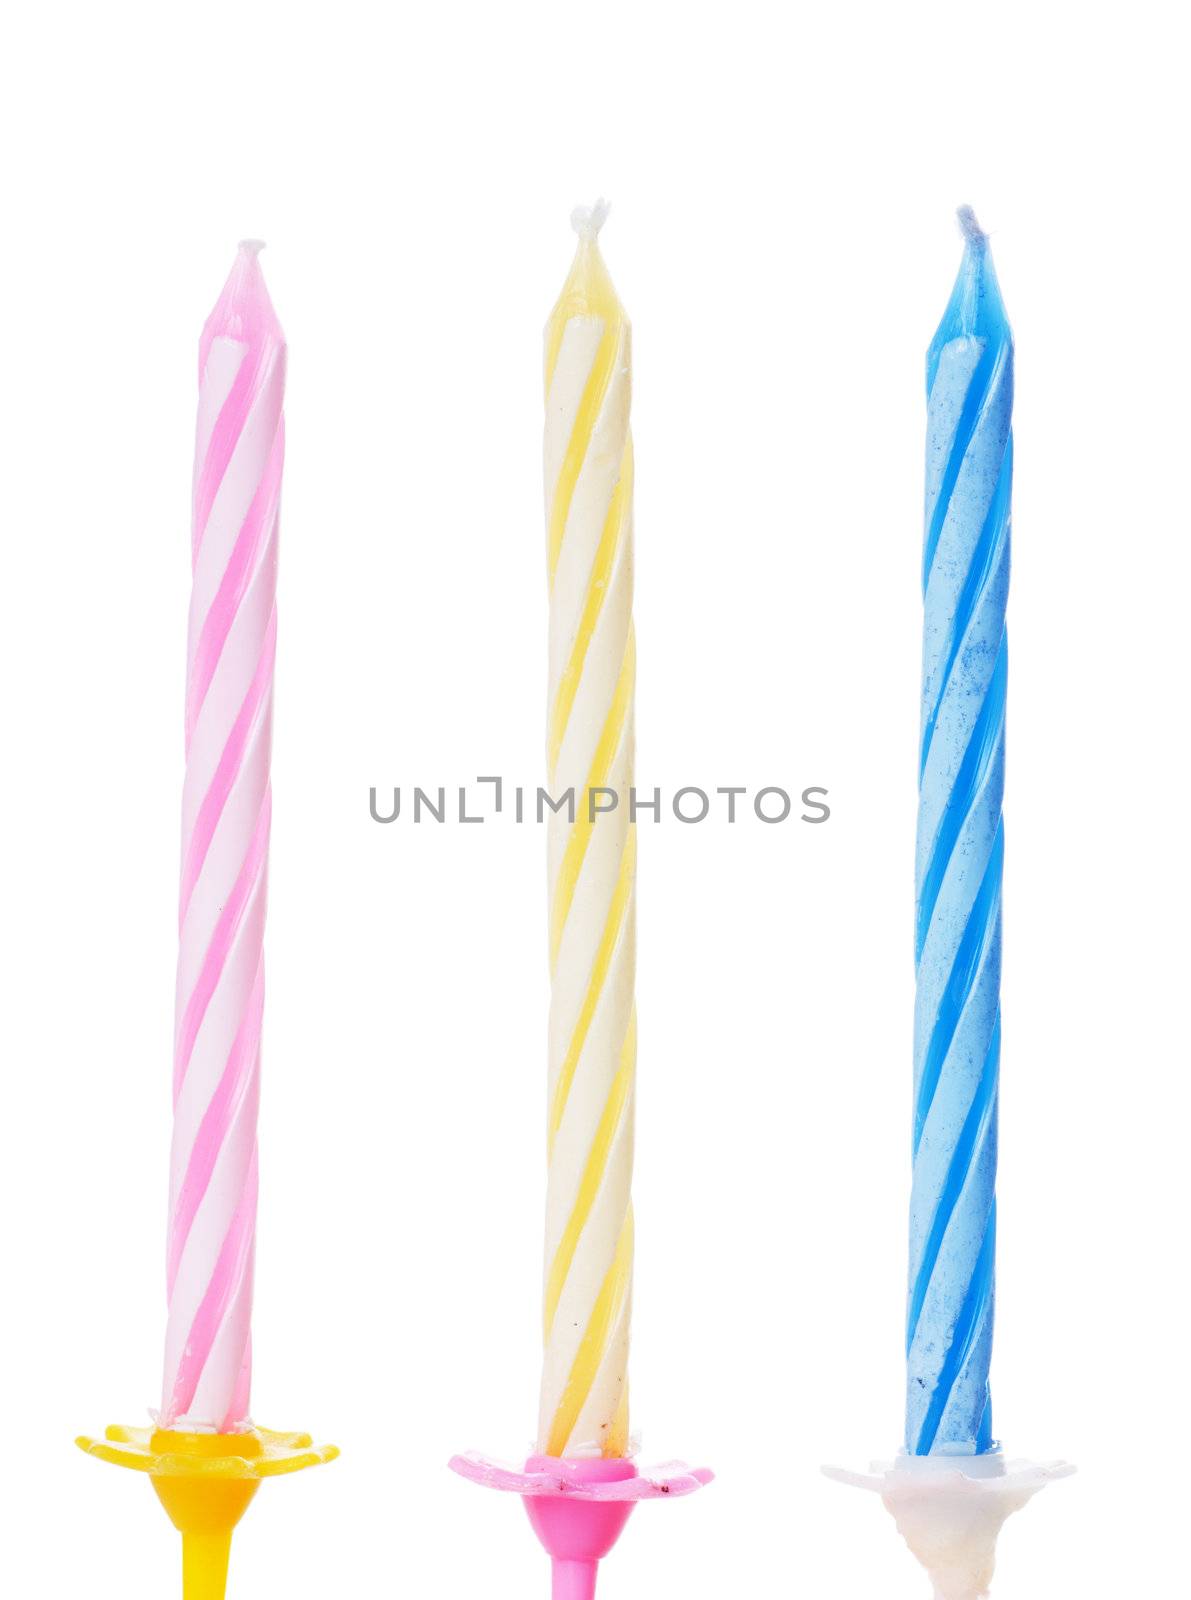 Closeup view of three colorful birthdays candle